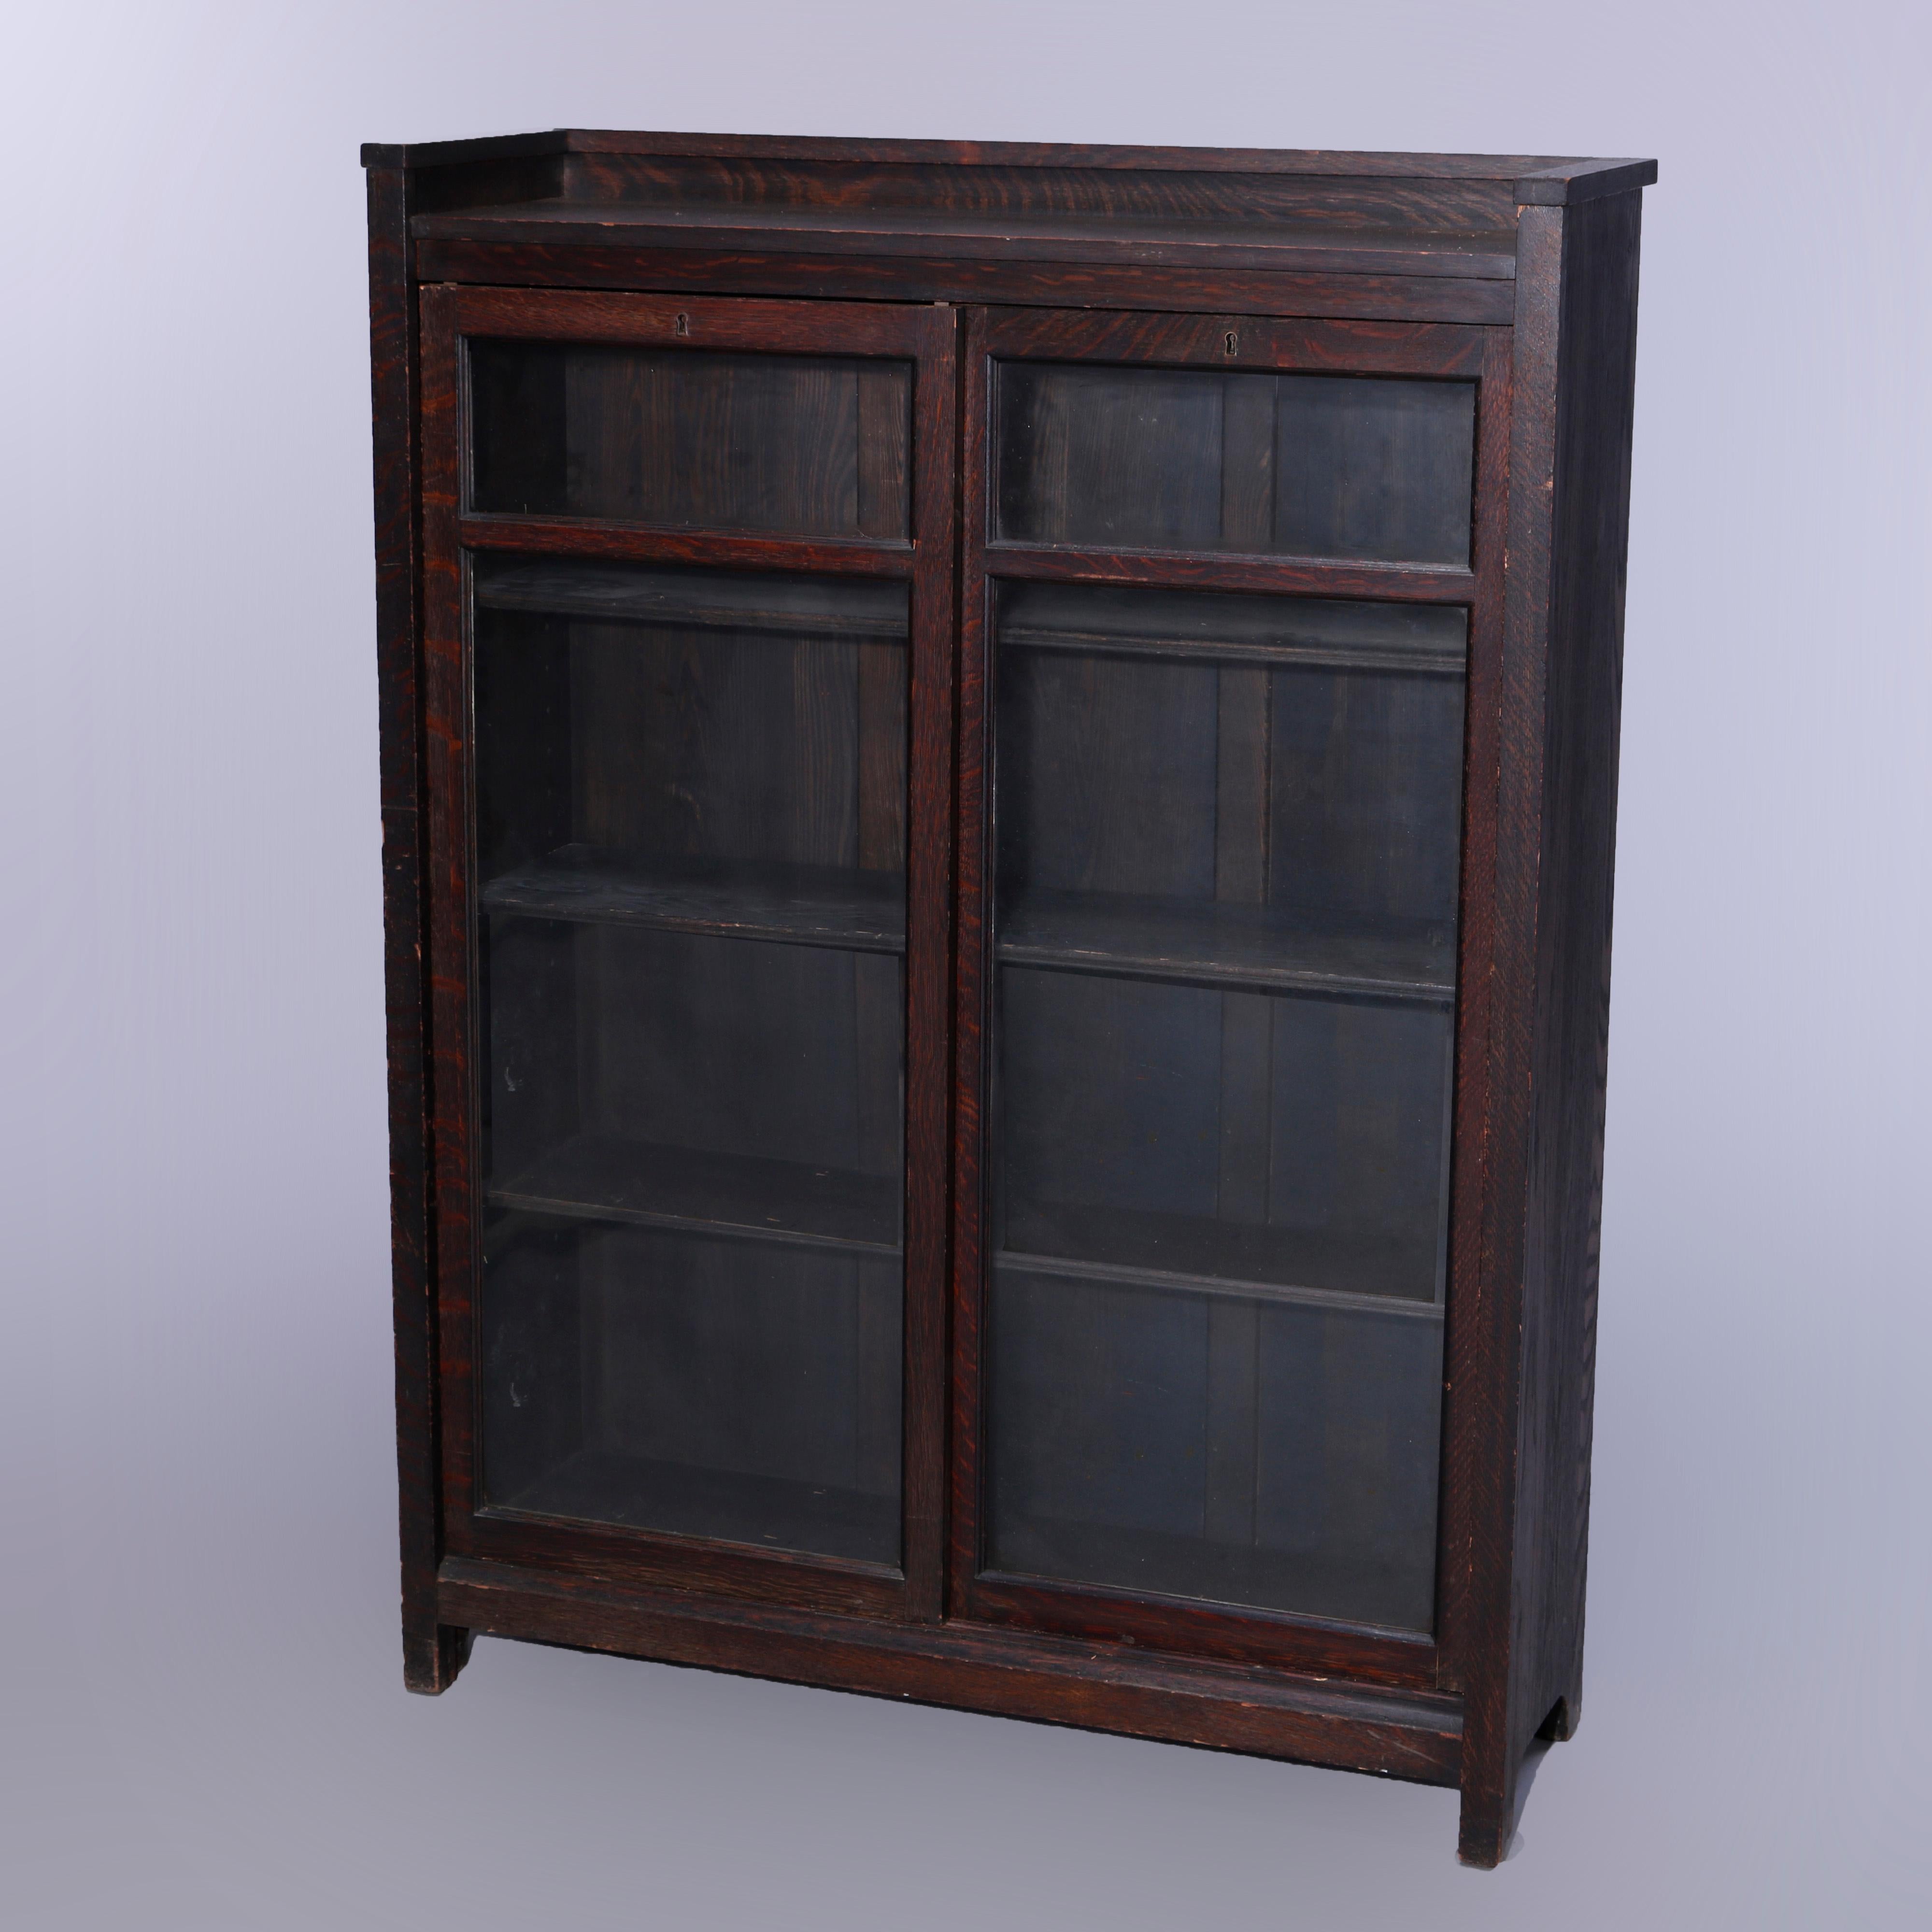 An antique Arts and Crafts Mission enclosed bookcase offers quarter sawn oak construction with upper gallery surmounting case with sliding glass doors opening to shelved interior, raised on square and straight legs, c1910

Measures - 53.75''H x